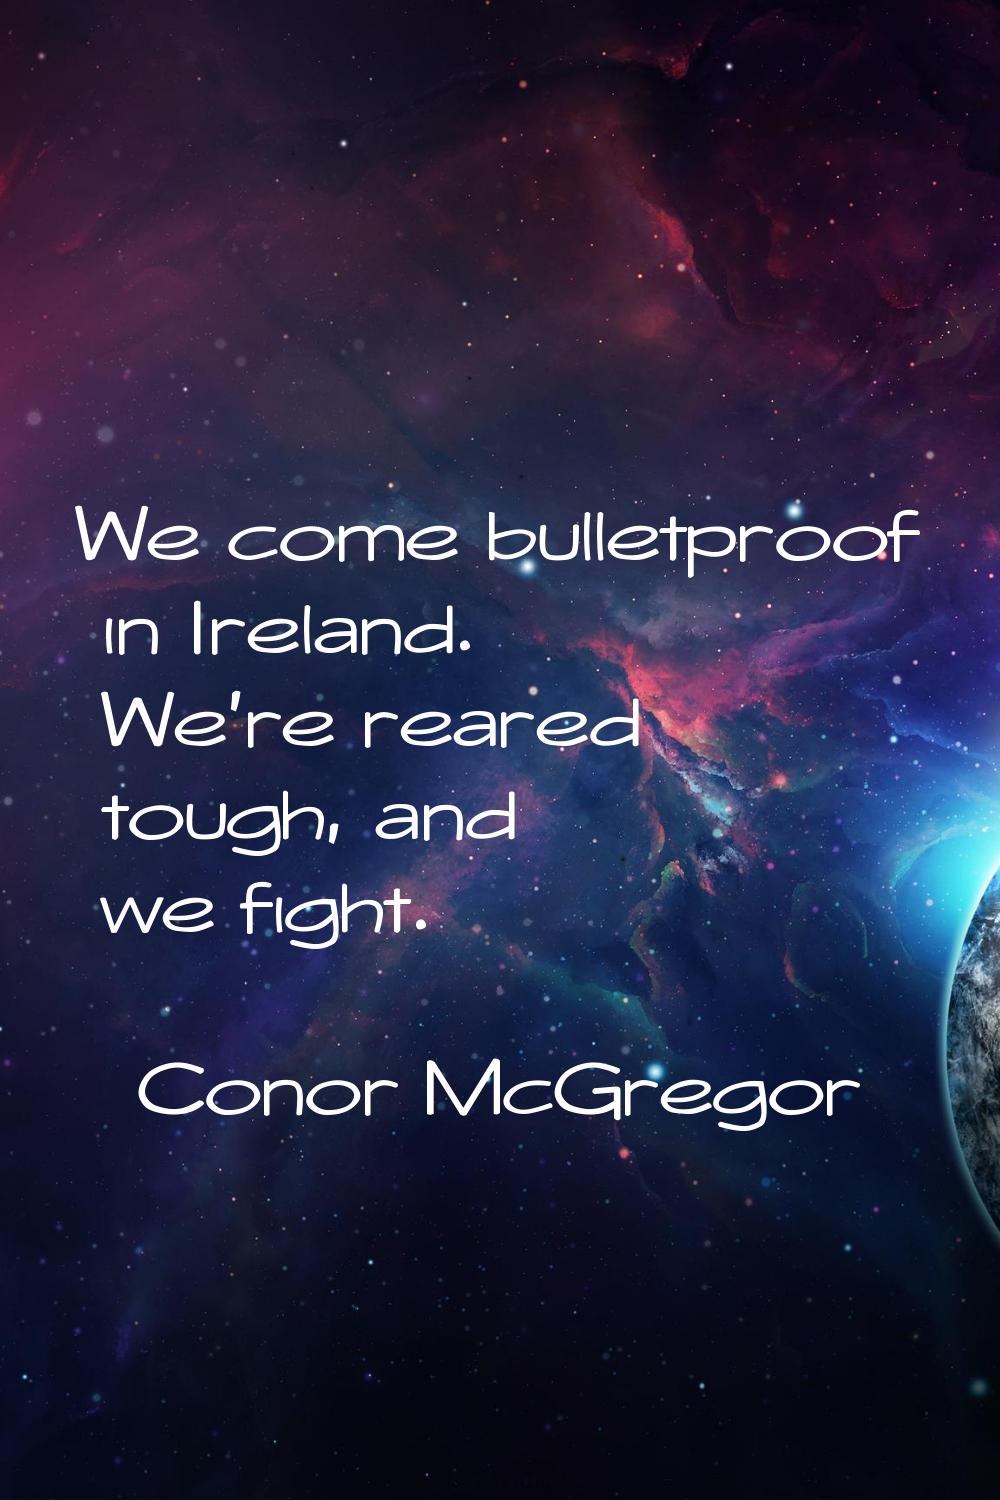 We come bulletproof in Ireland. We're reared tough, and we fight.